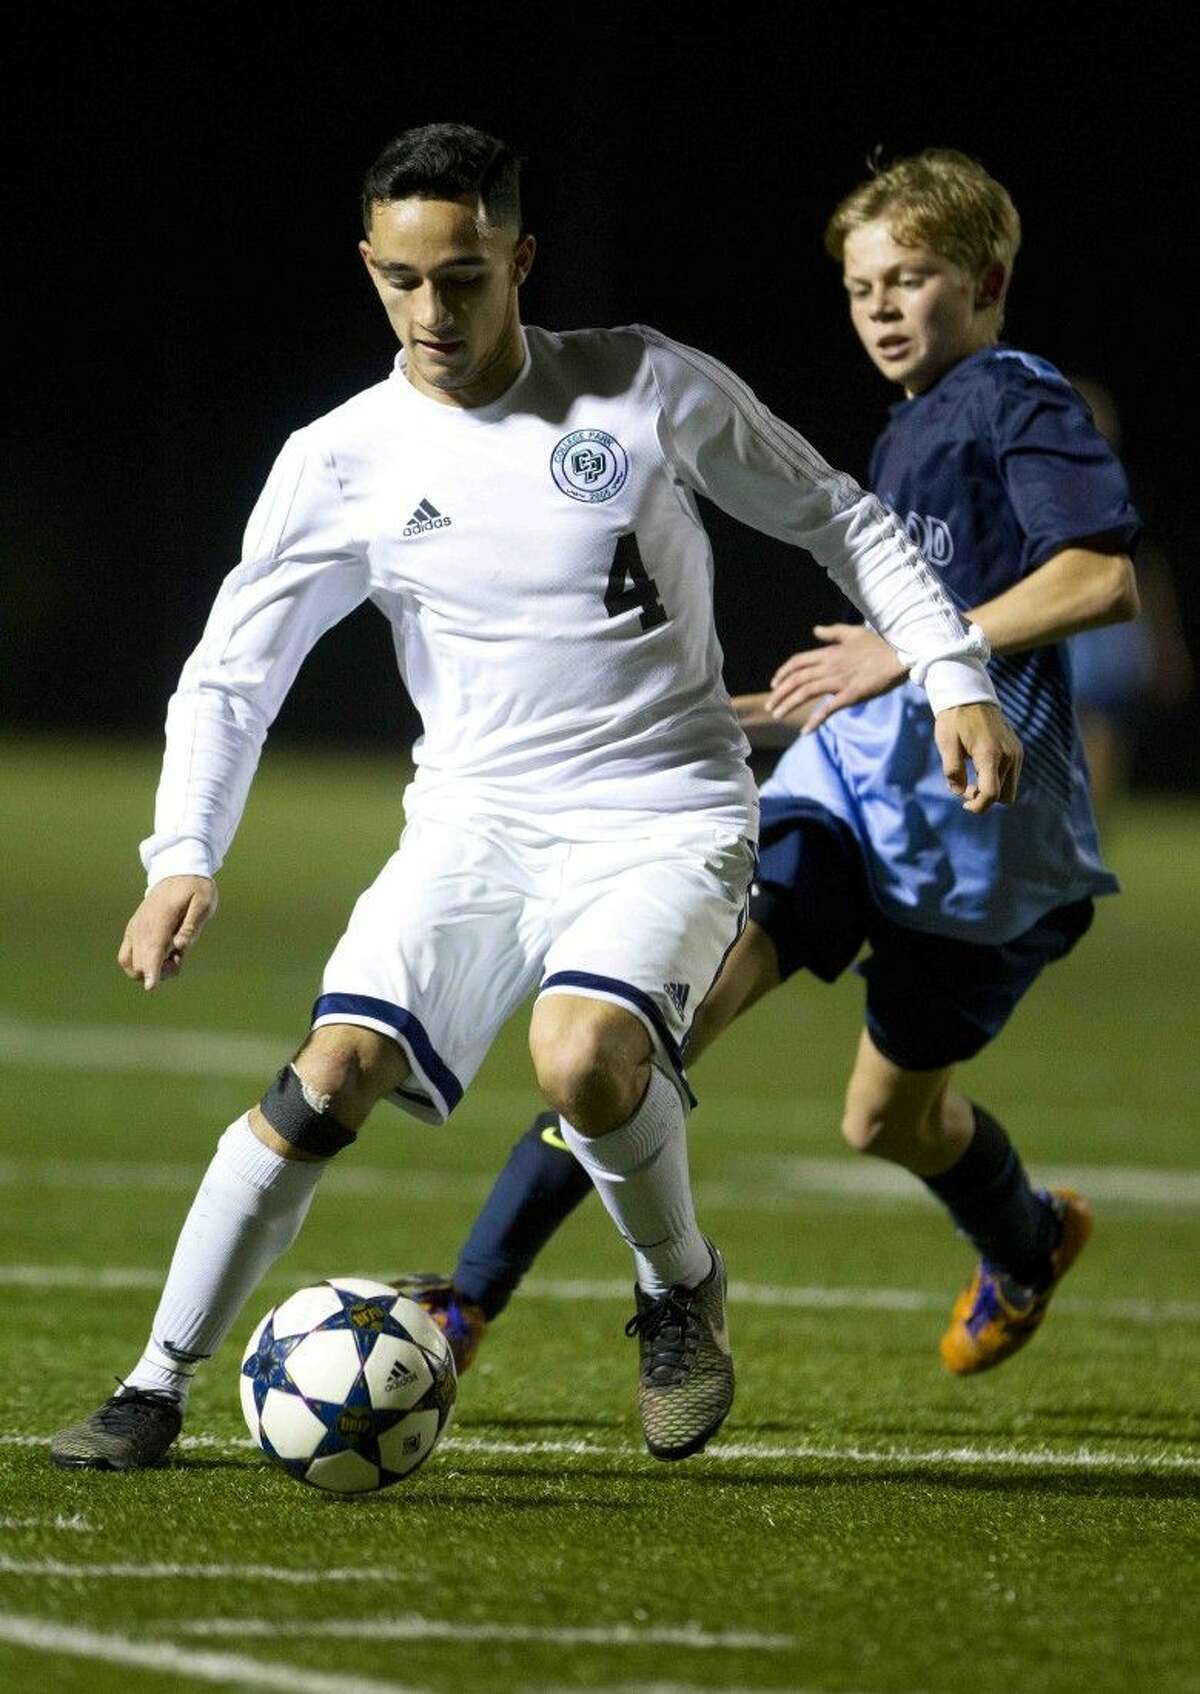 College Park's Samuel Molina looks to control the ball as Kingwood's Thomas Ditges defends during a high school soccer game Friday. To view or purchase this photo and others like it, visit HCNpics.com.